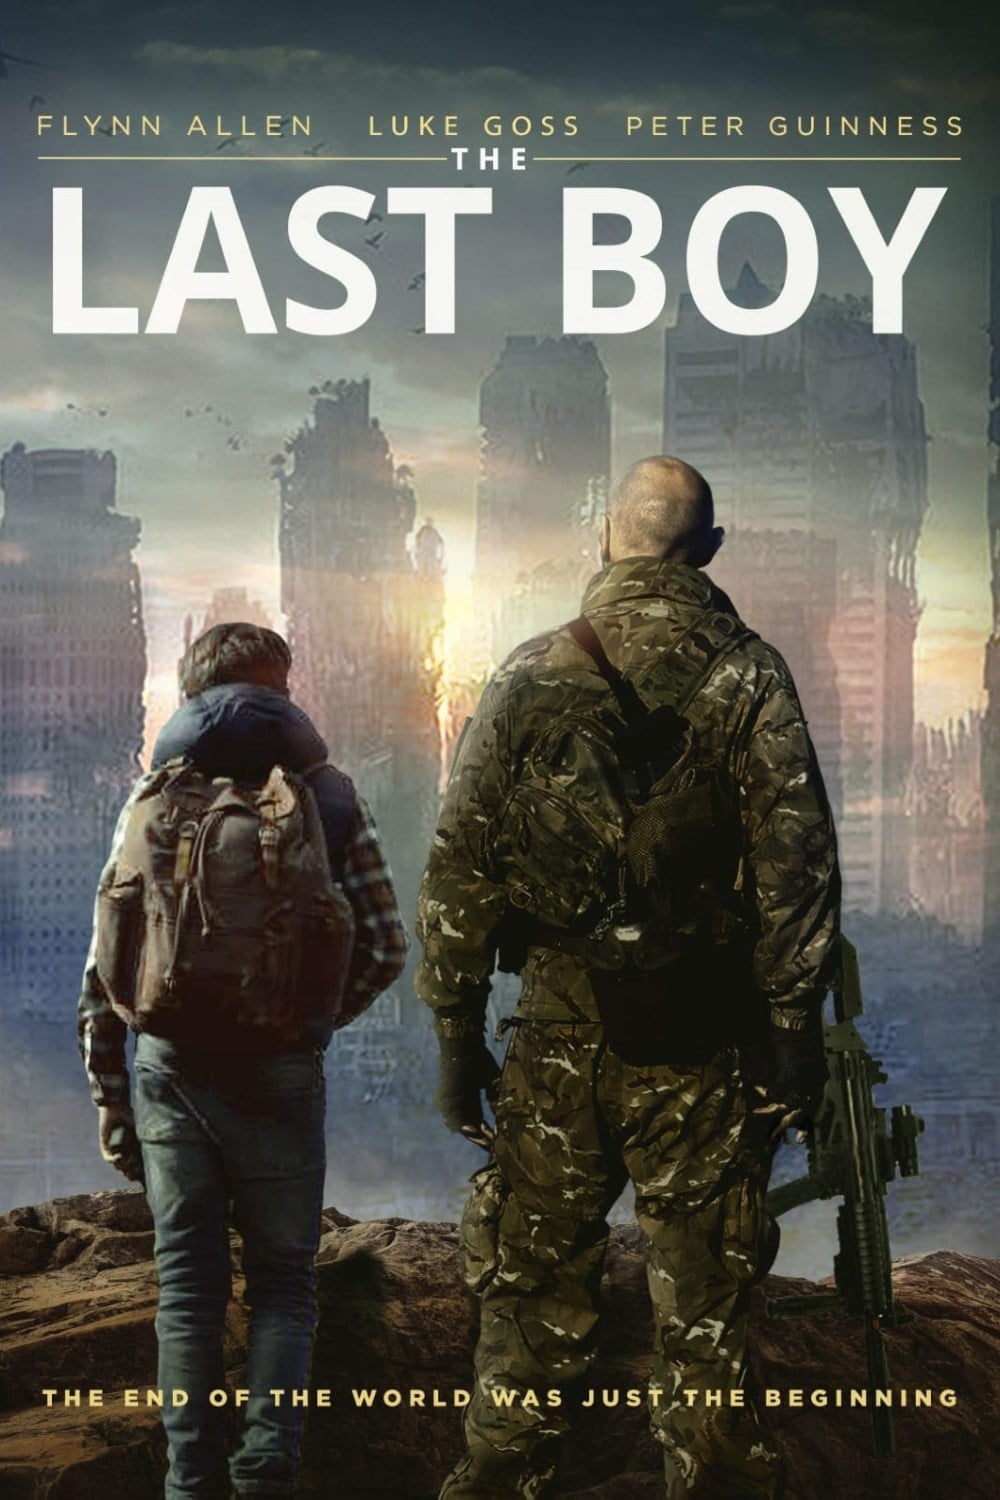 Poster for the movie "The Last Boy"